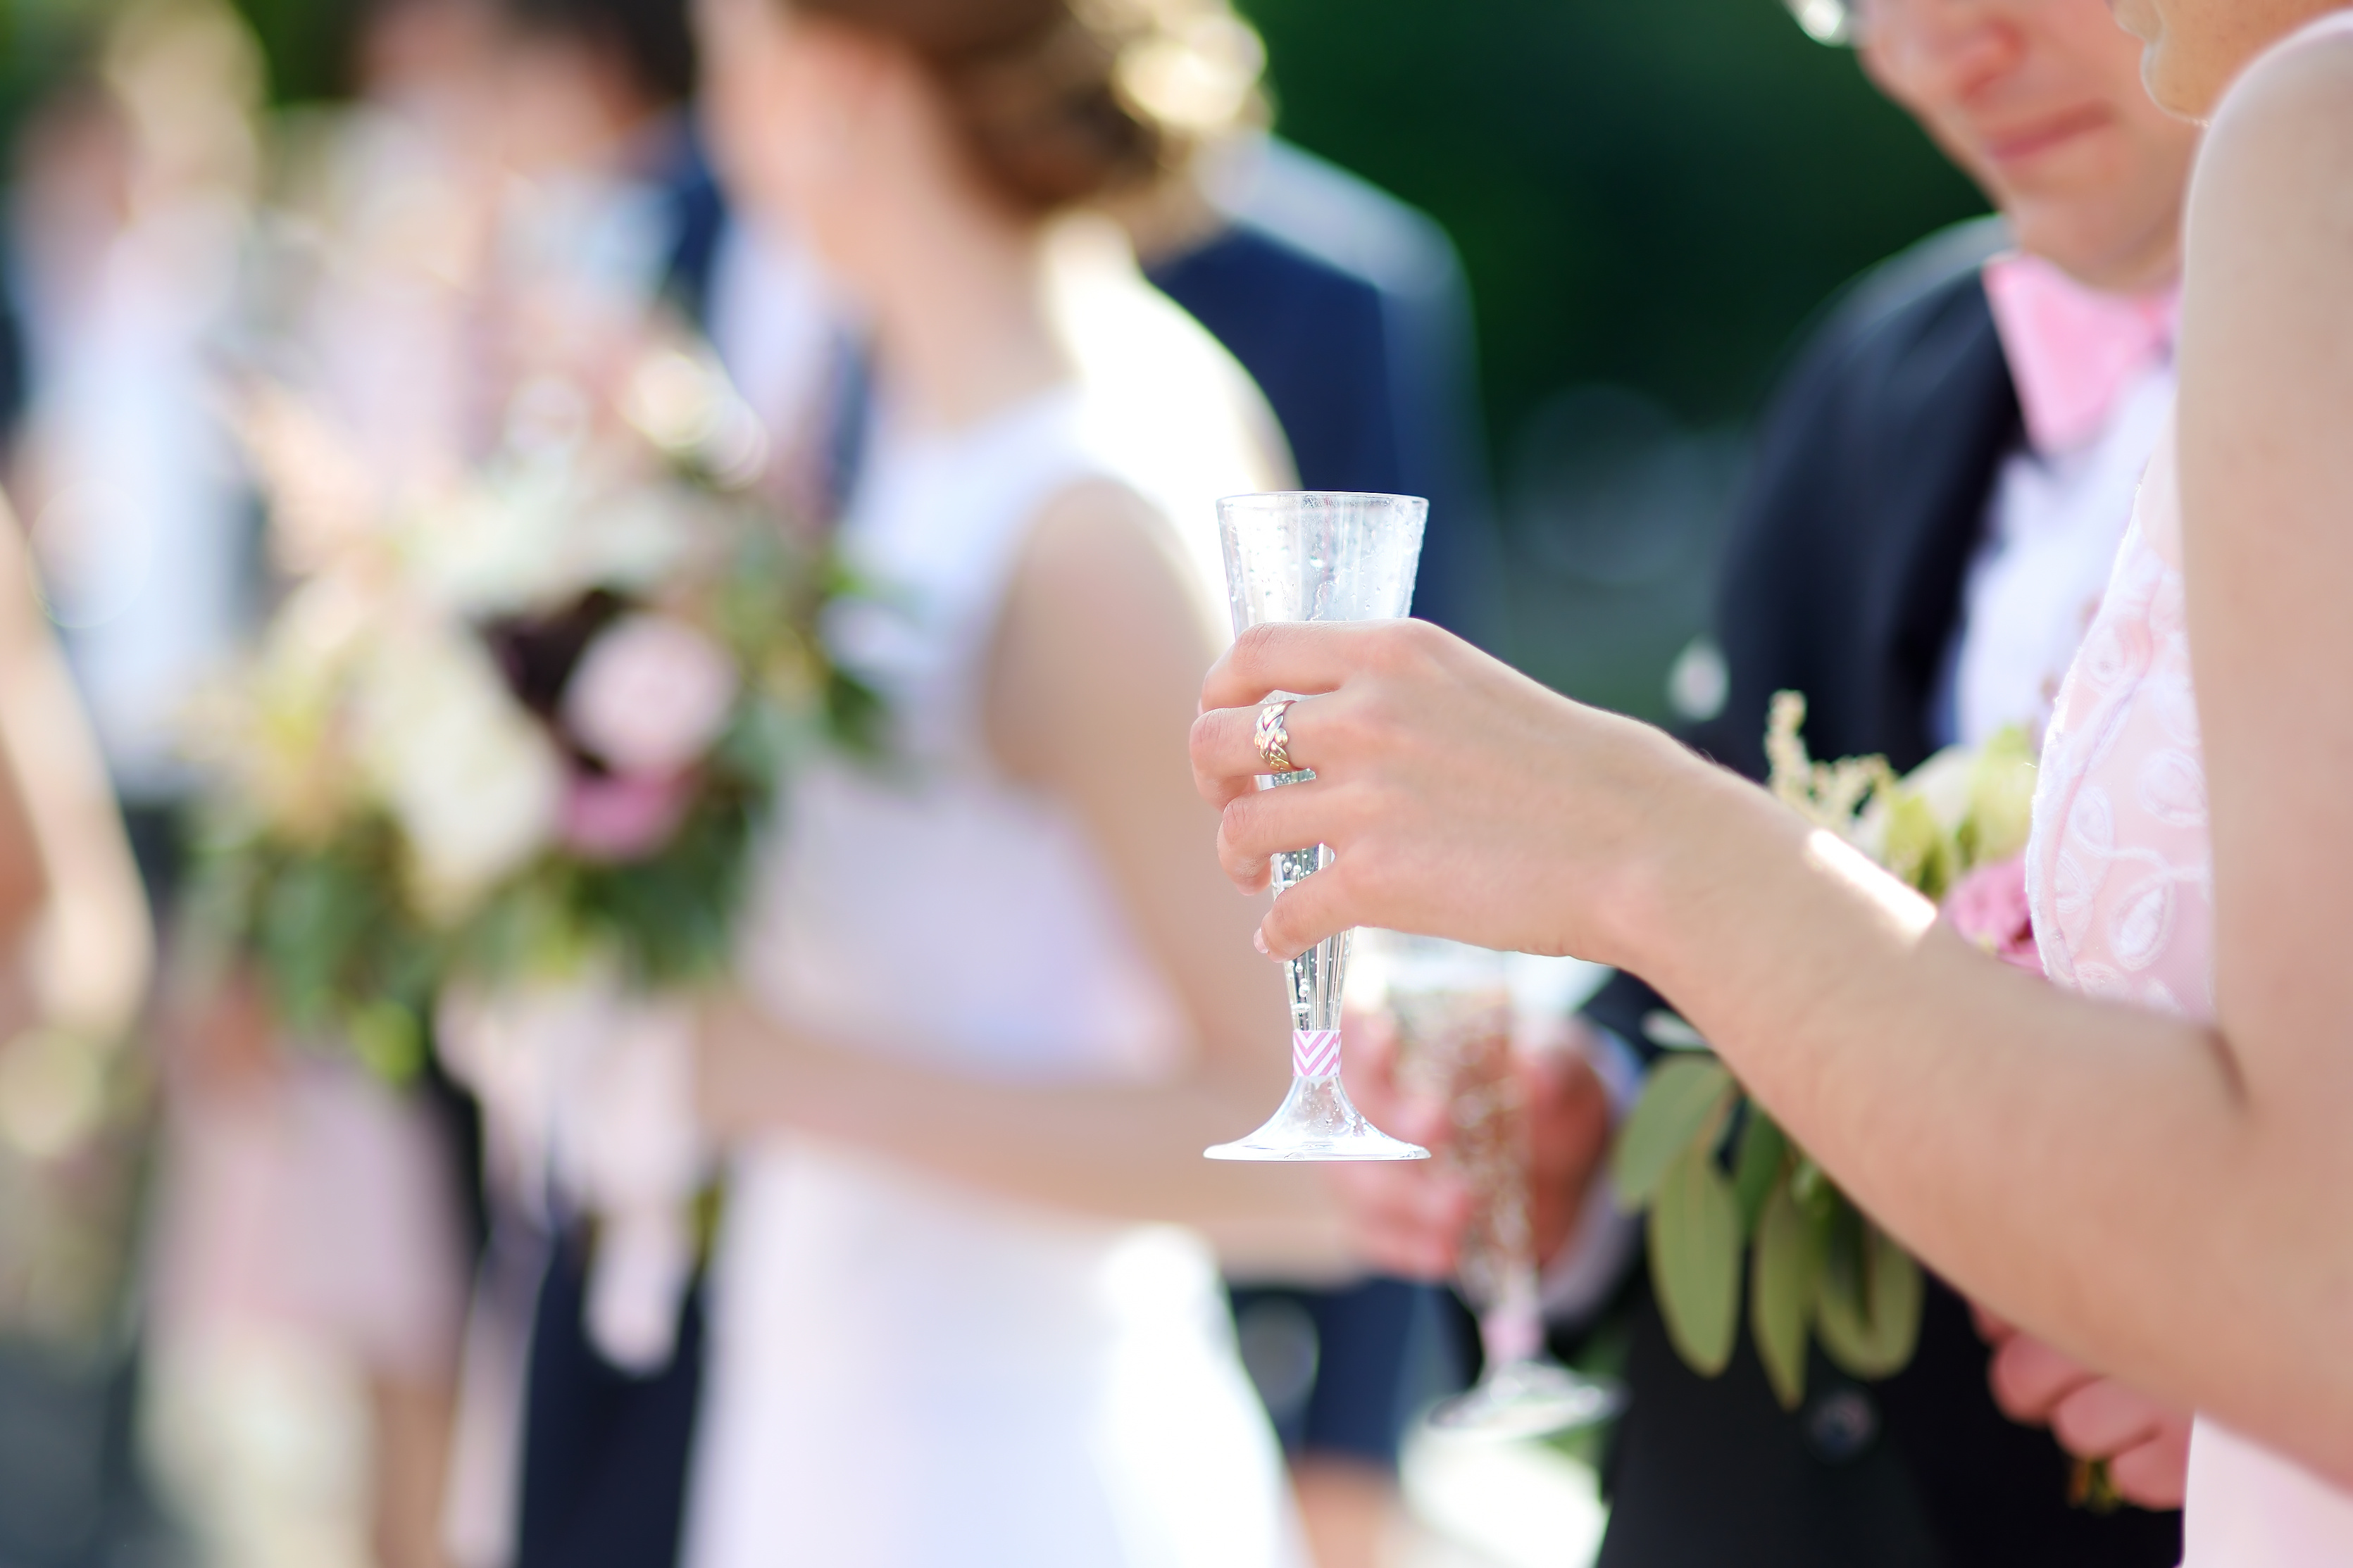 Woman holding a glass of champagne at some festive event, party or wedding reception